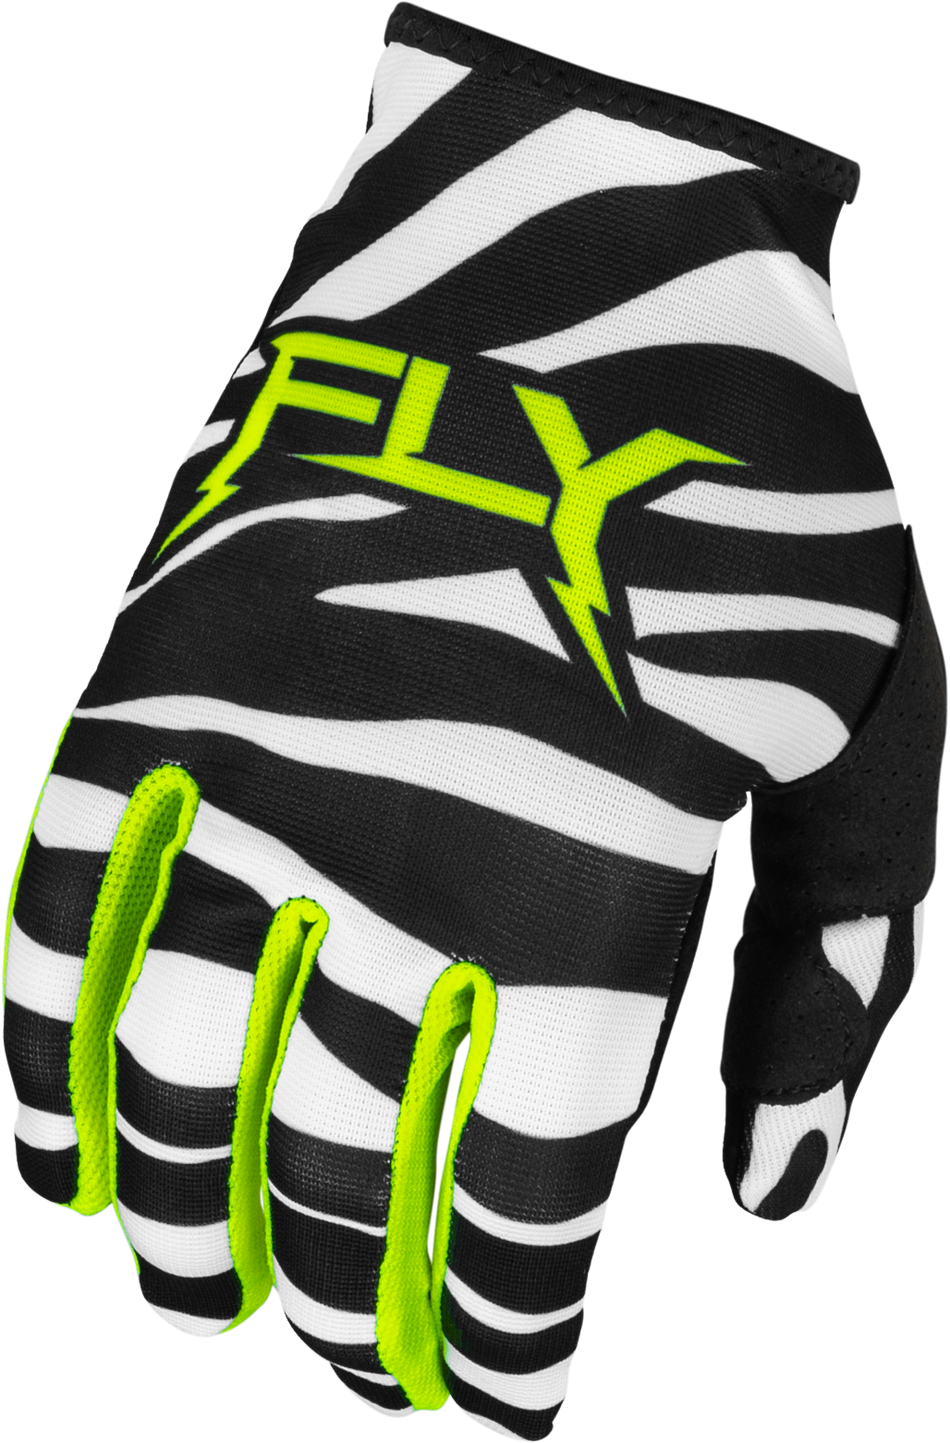 FLY RACING Lite Uncaged Gloves Black/White/Neon Green Md 377-742M